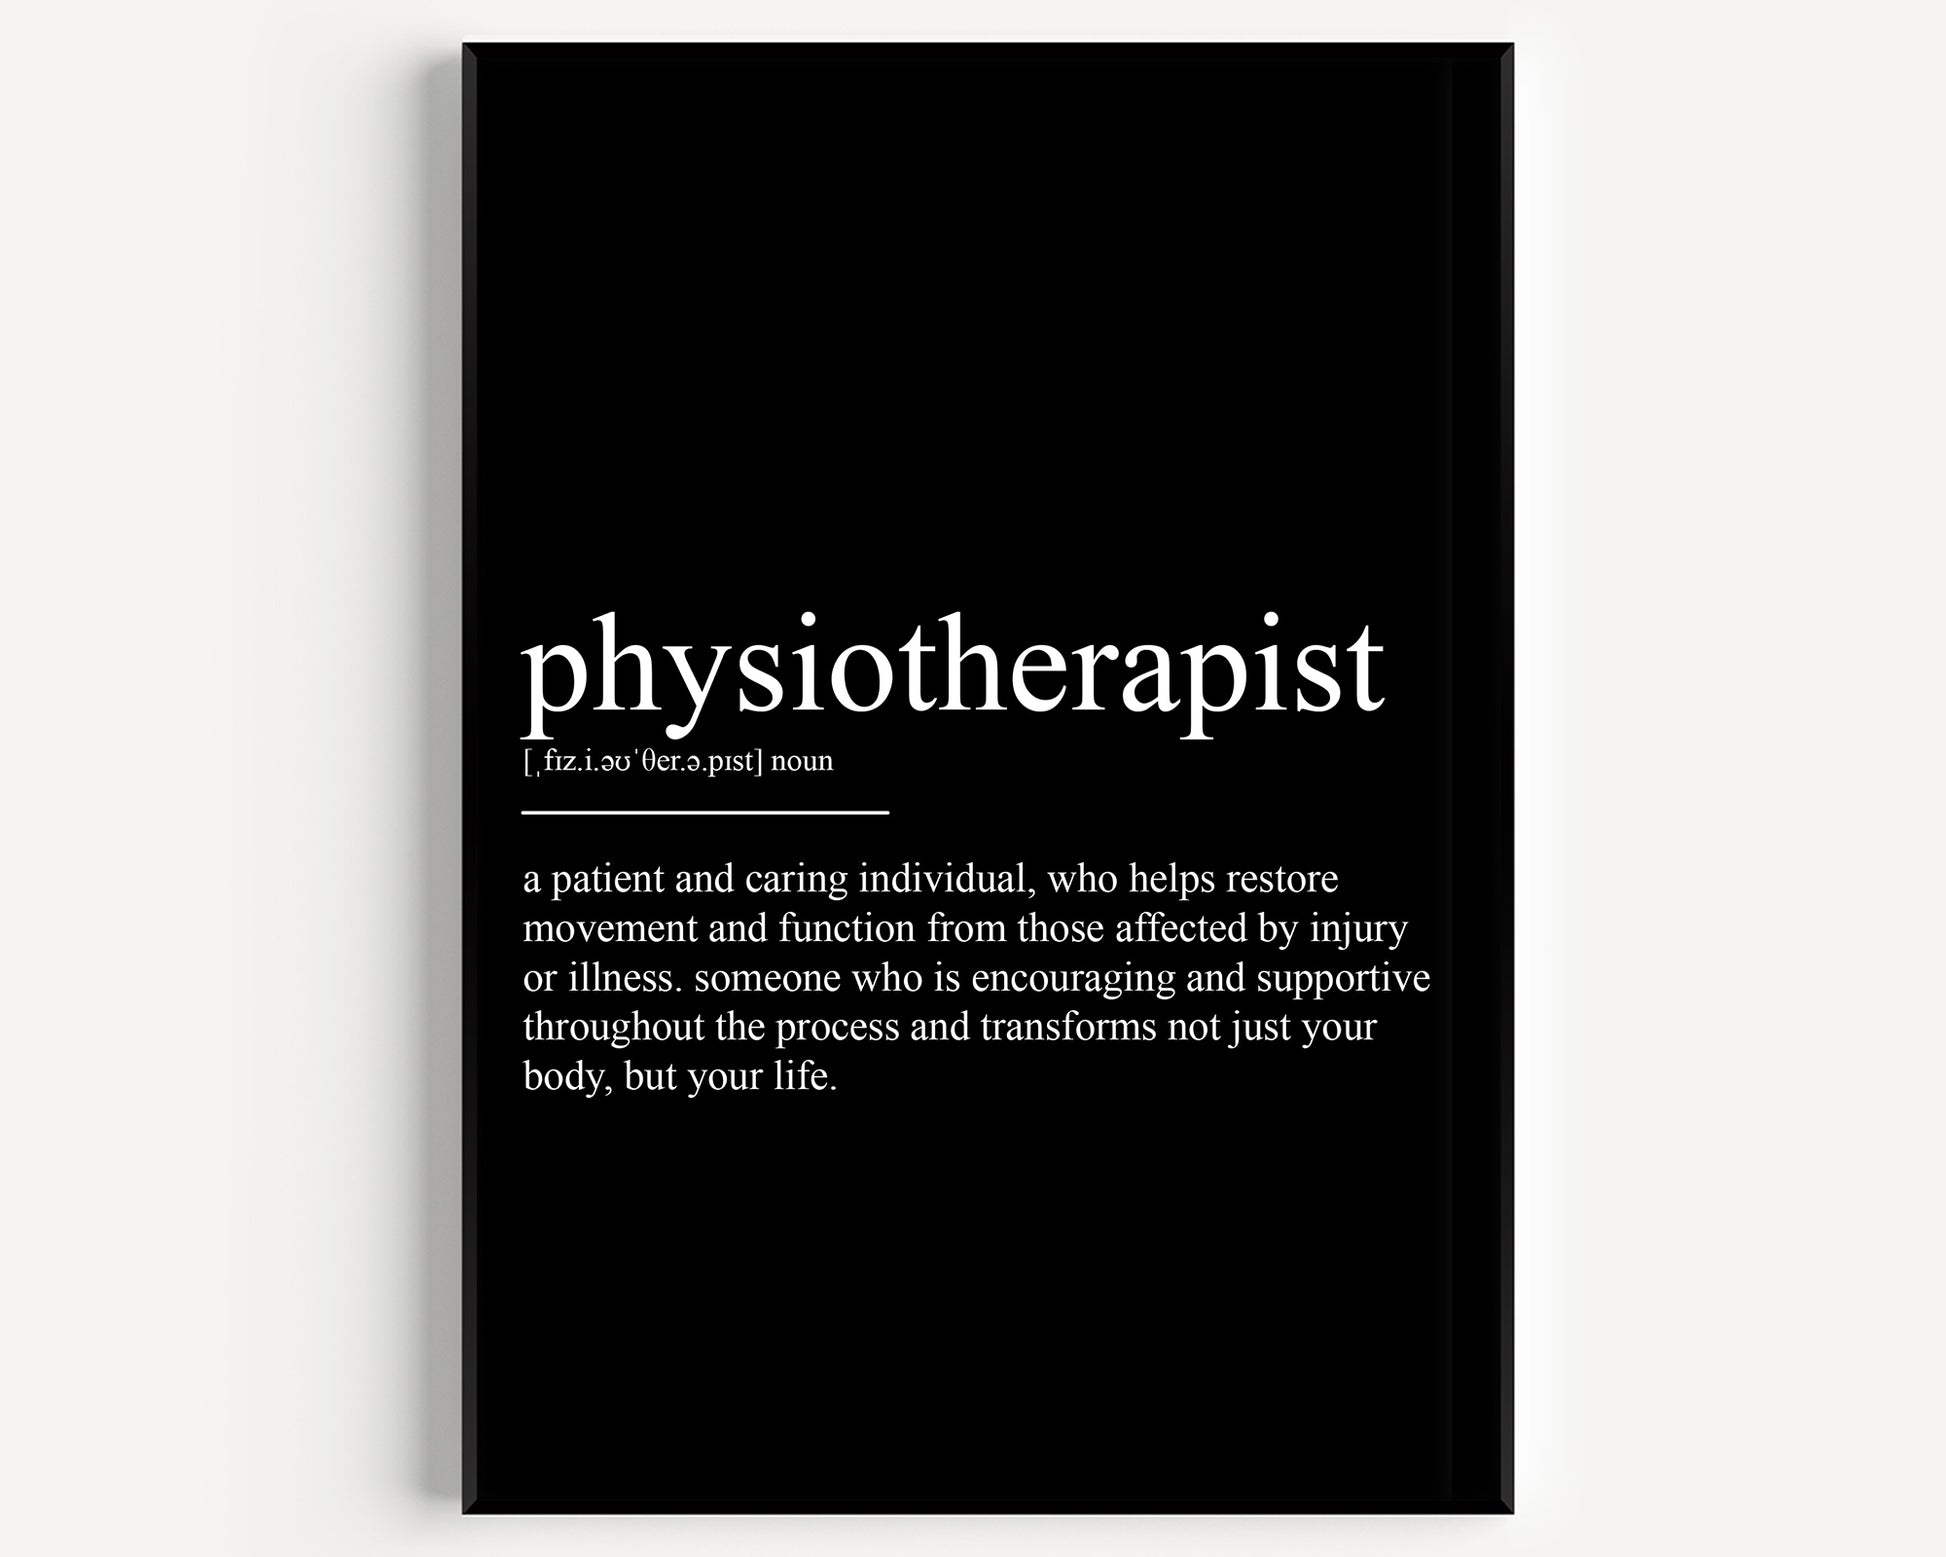 Physiotherapist Definition Print V3 - Magic Posters